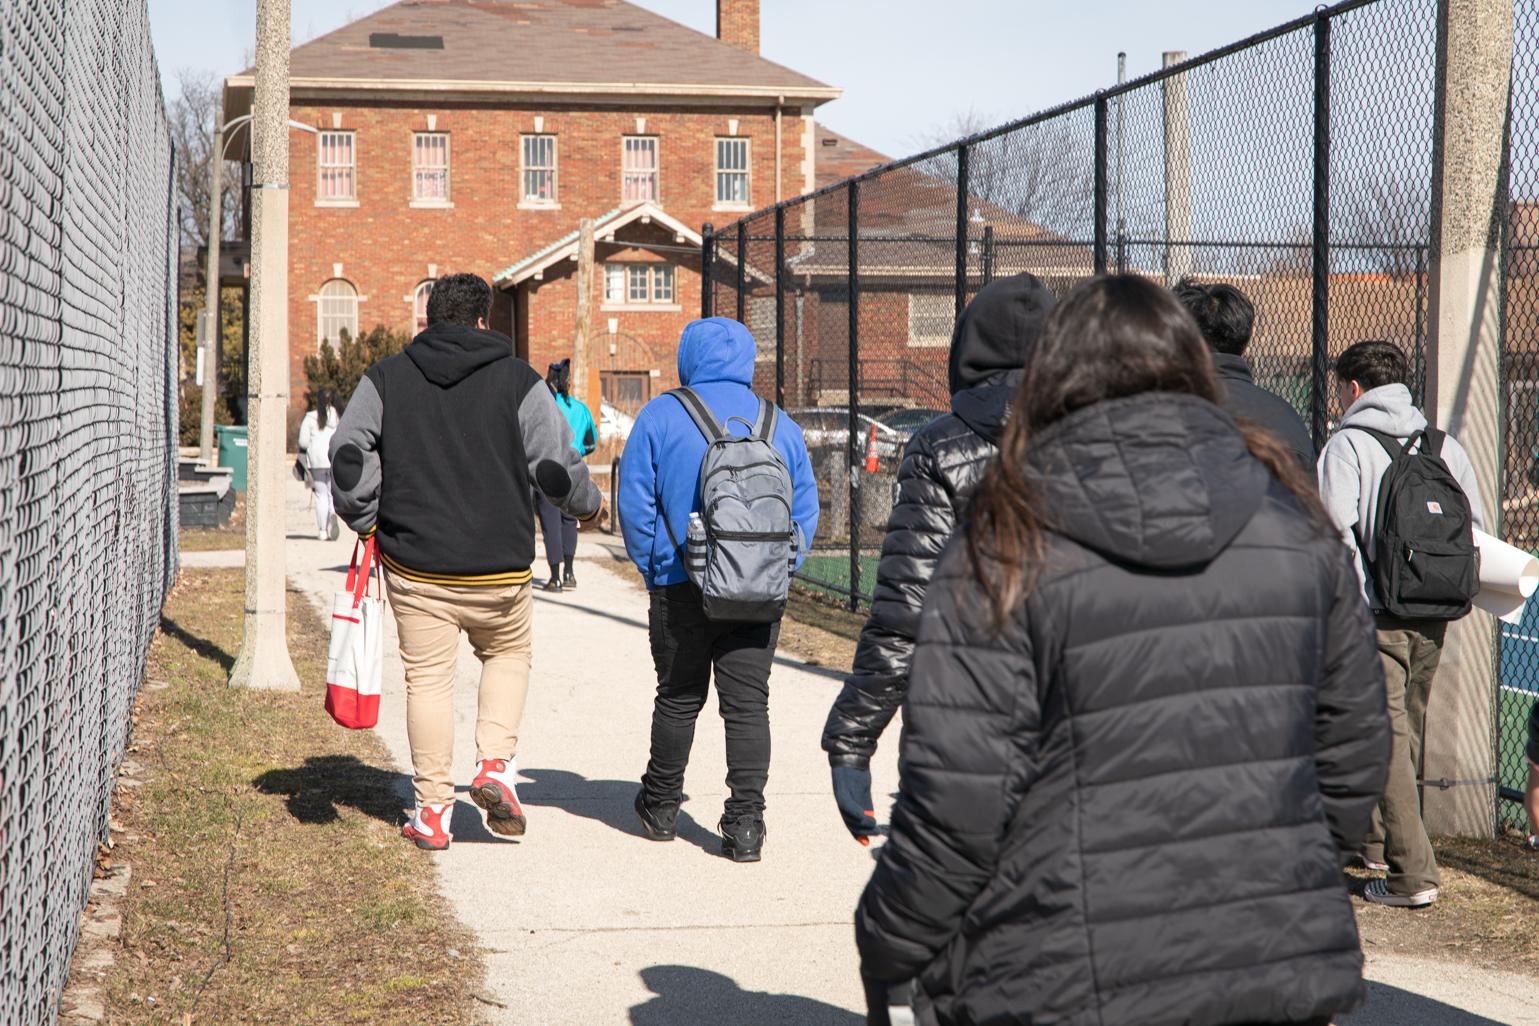 A group of Kelvyn Park High School seniors arrive at an early polling location at Kilbourn Park to register to vote and cast their ballot as part of Chicago Votes’ “Parade to the Polls” initiative on Feb. 21, 2023. (Michael Izquierdo / WTTW News)